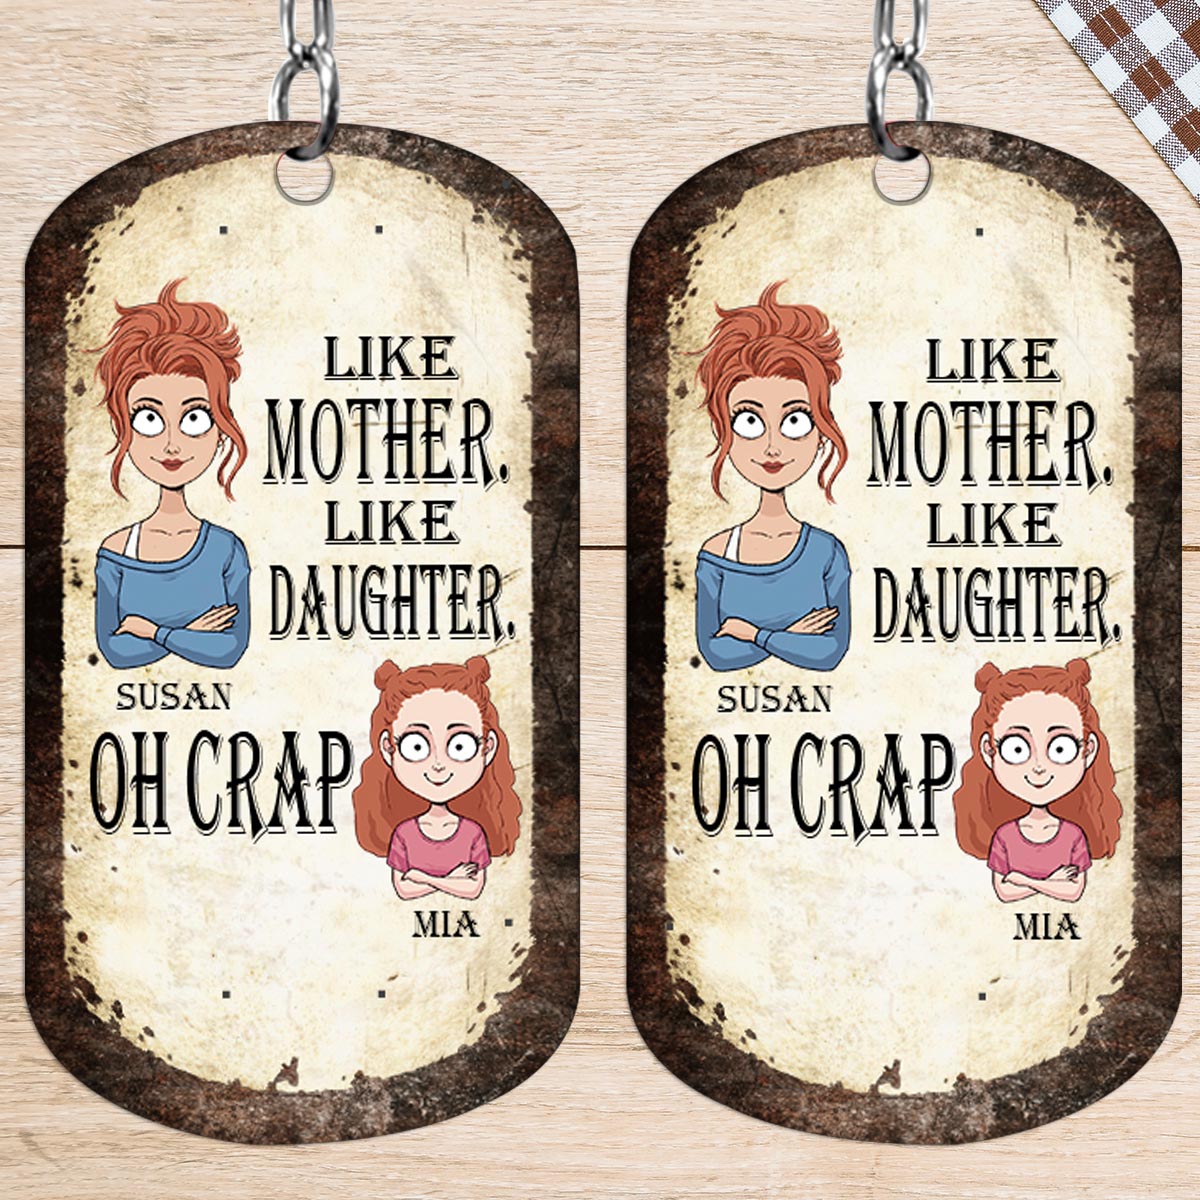 Disover Like Father Like Daughter Like Son - Gift for dad, mom, son, daughter - Personalized Stainless Steel Keychain